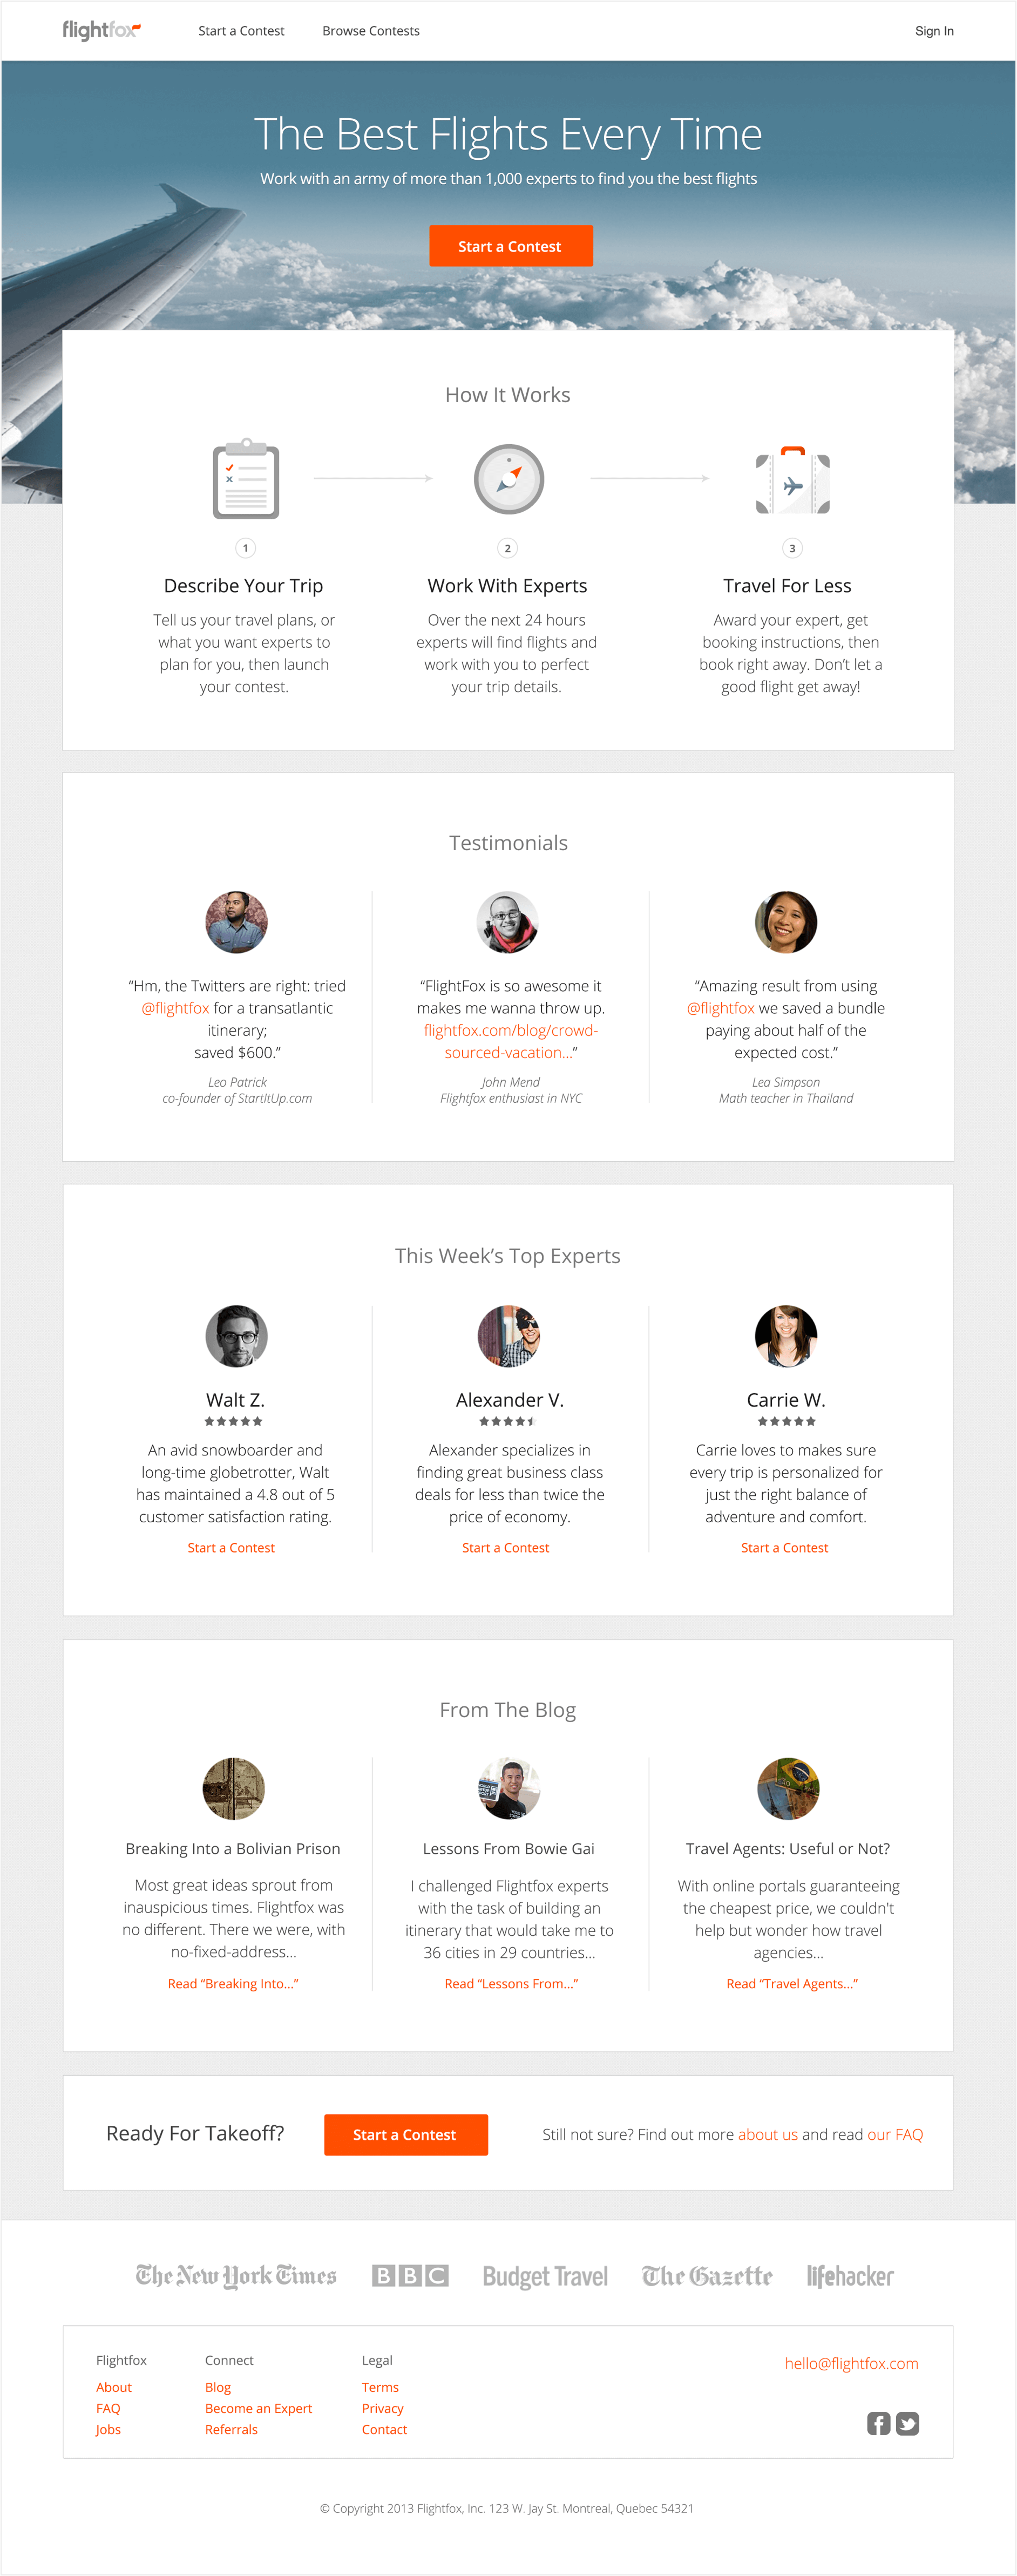 Homepage showing featured expert’s biographies